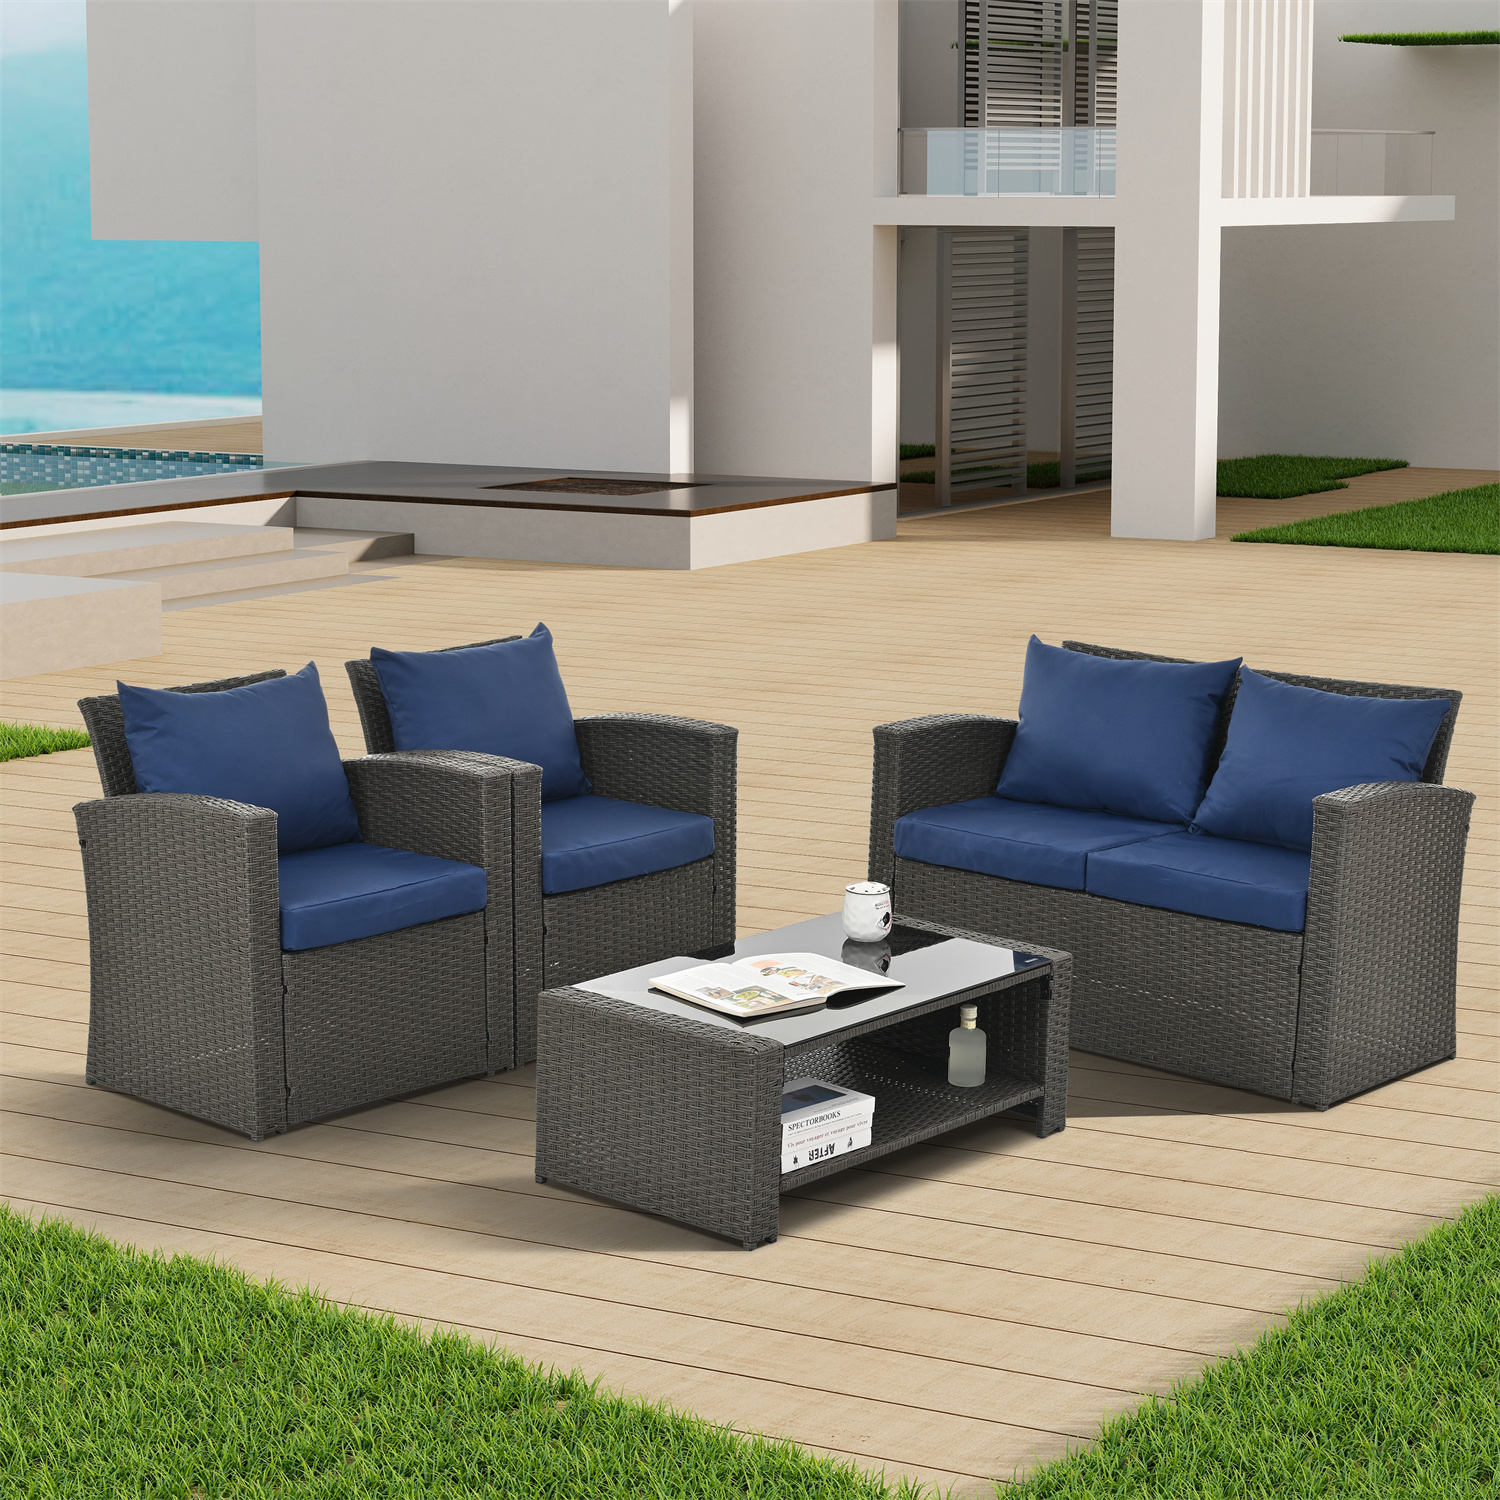 4 Piece Patio Furniture Set, Outdoor Conversation Set Acacia Solid Wood Outdoor Sofa Set for Poolside Garden, Grey Cushions - image 3 of 7